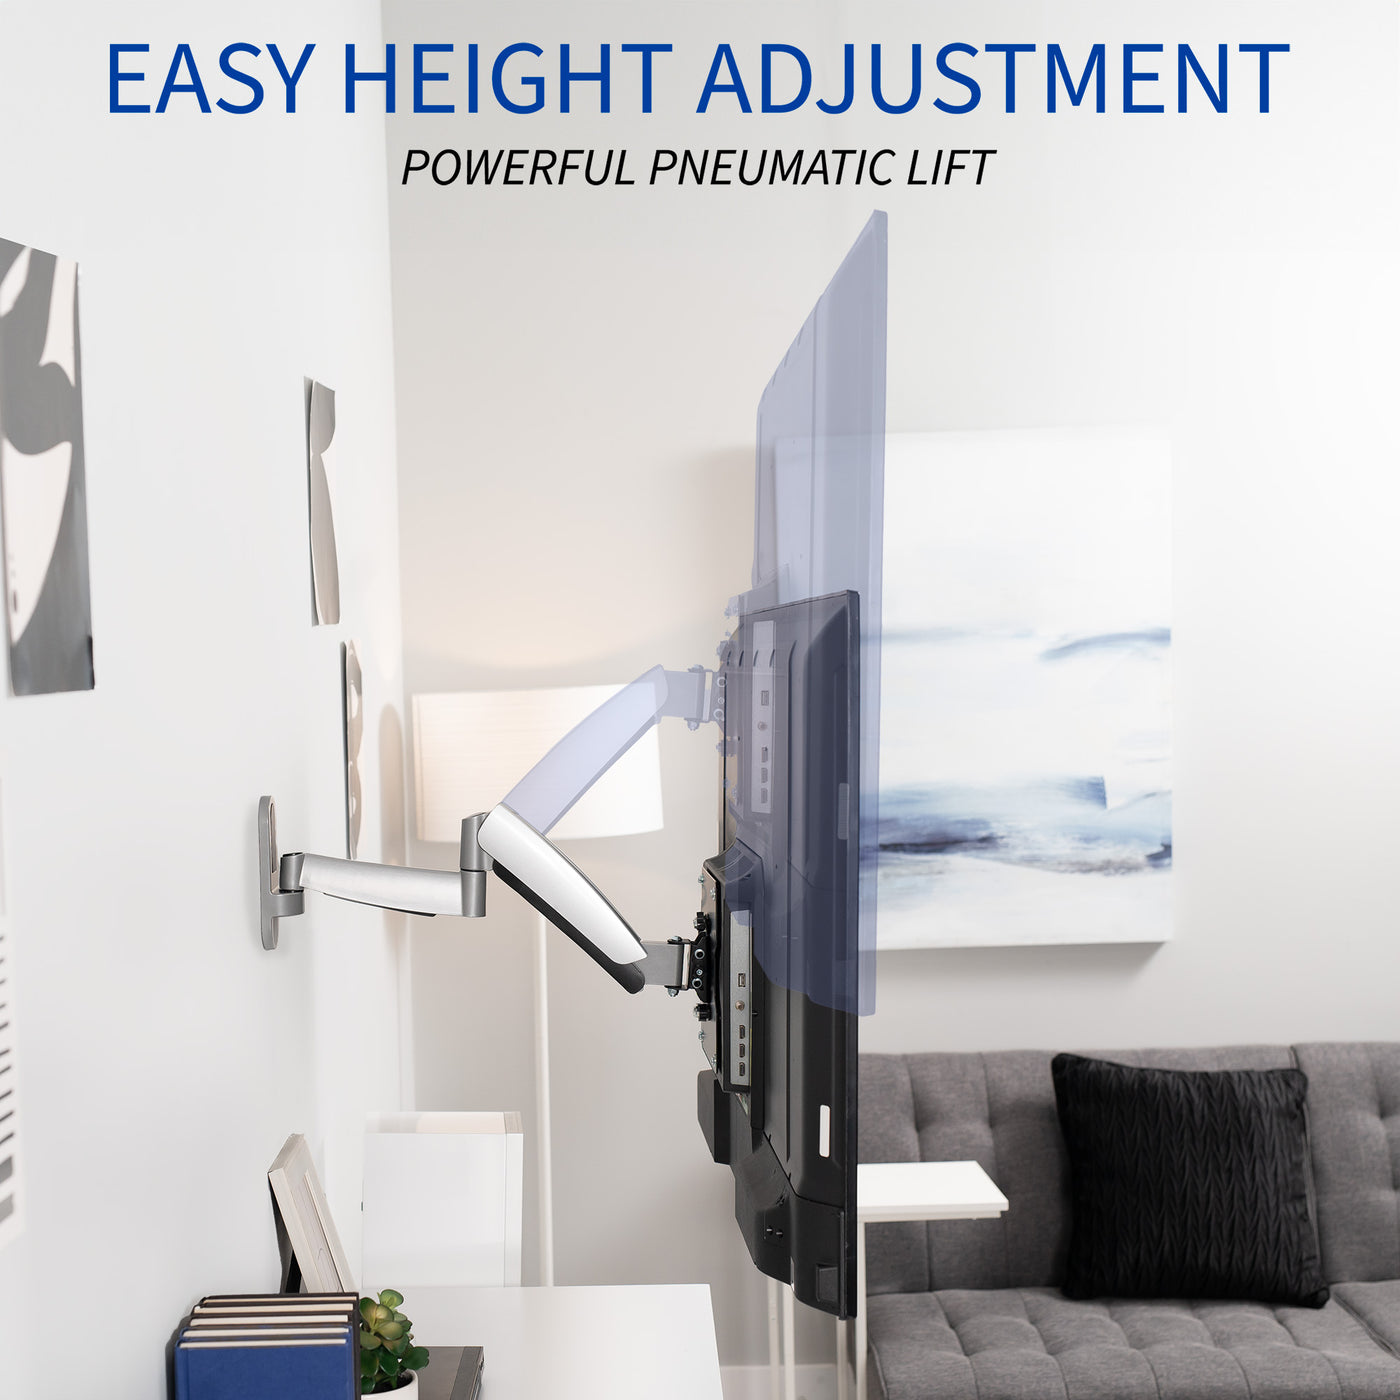 easy height adjustment and powerful pneumatic lift